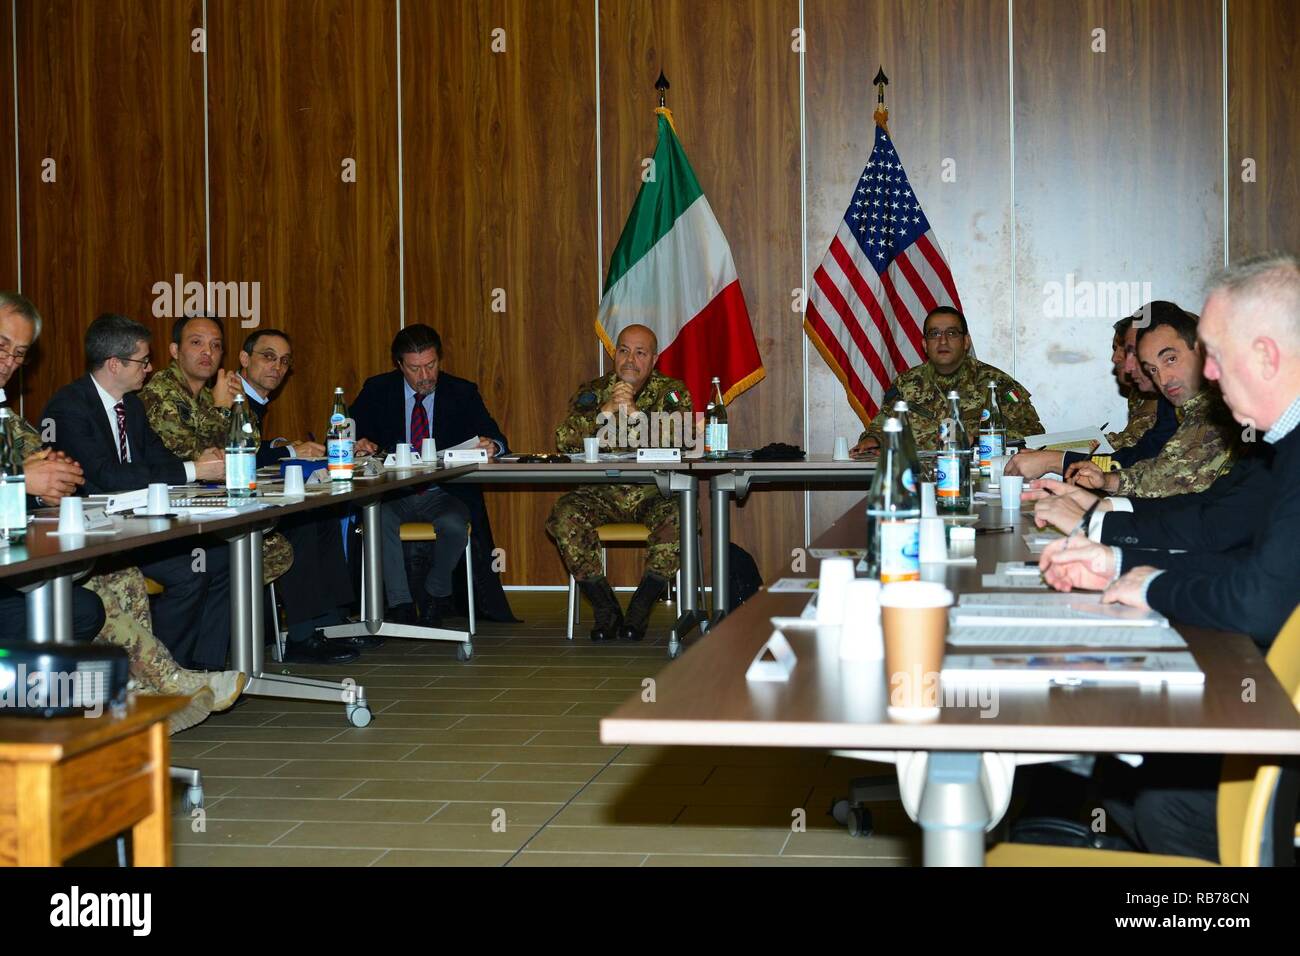 Gen. Carmelo De Cicco in the middle of members of United States Army, the Italian army, Italian authorities and Italian civilians from COMIPAR (Environmental Protection Committee) on Infrastructures Program USA Garrison Italy, Projects Fiscal Year 17 at Caserma Del Din in Vicenza, Italy, Dec. 13, 2016. Stock Photo